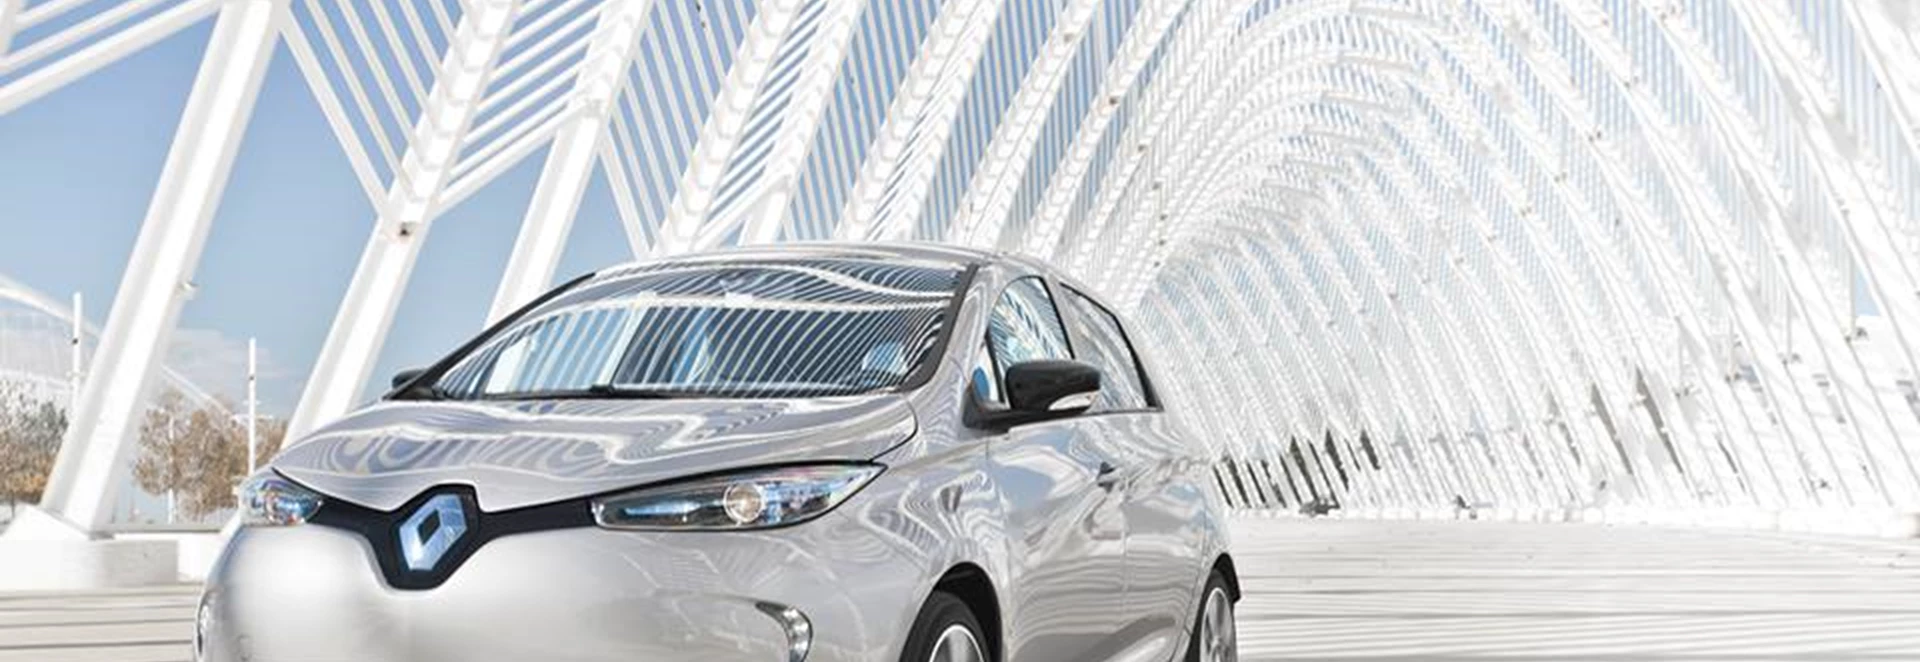 2017 Renault ZOE details emerge, range nearly doubled